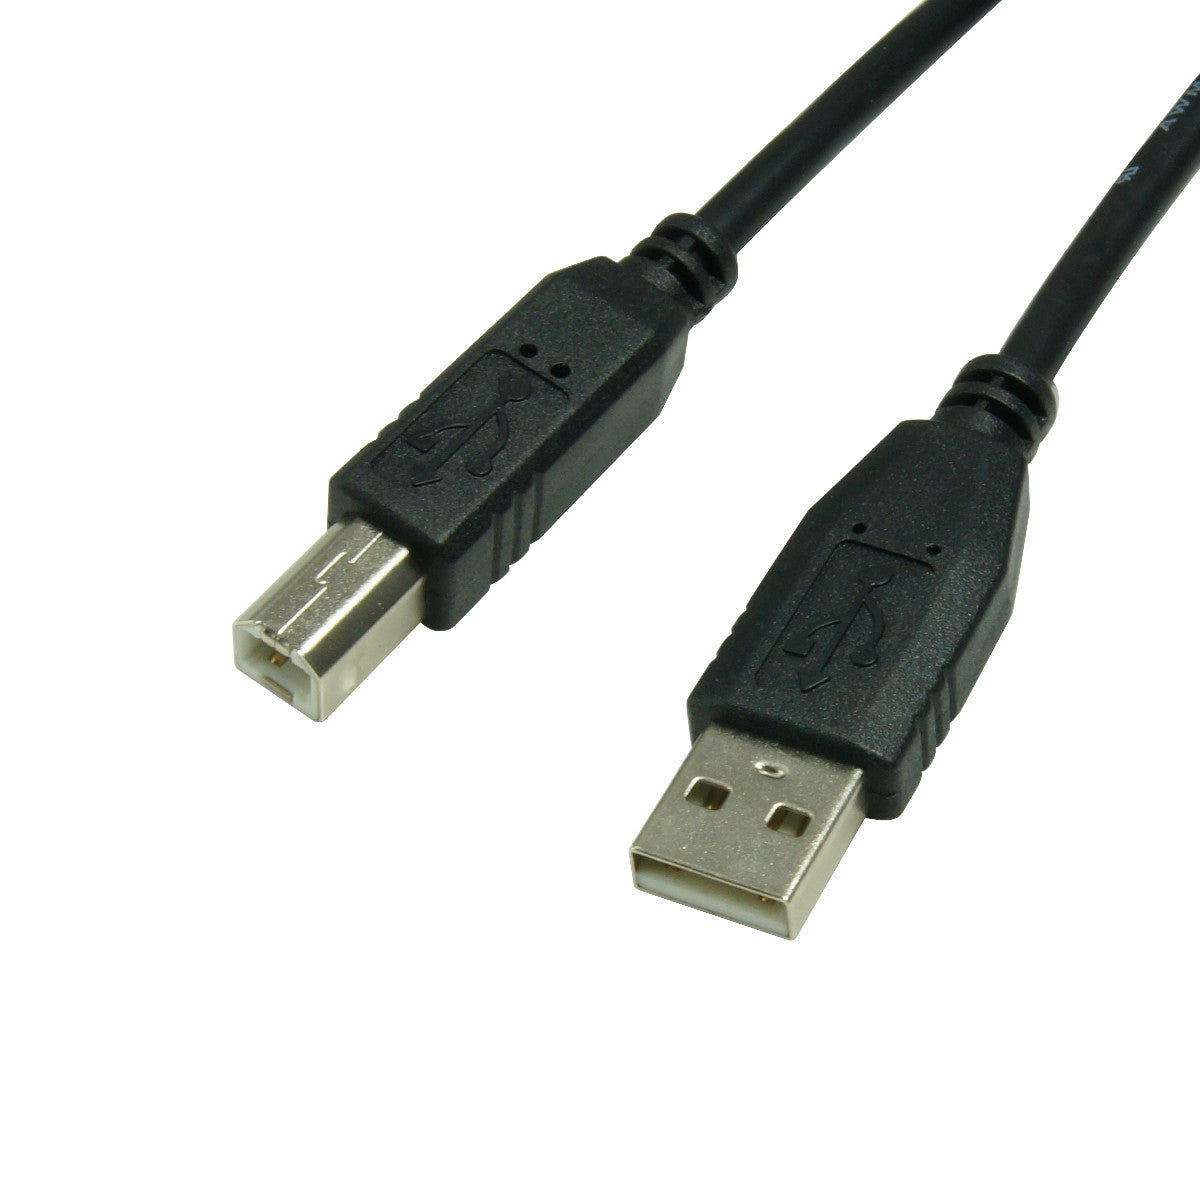 2.0 A Male to B Male Cable | GRANDMAX.com